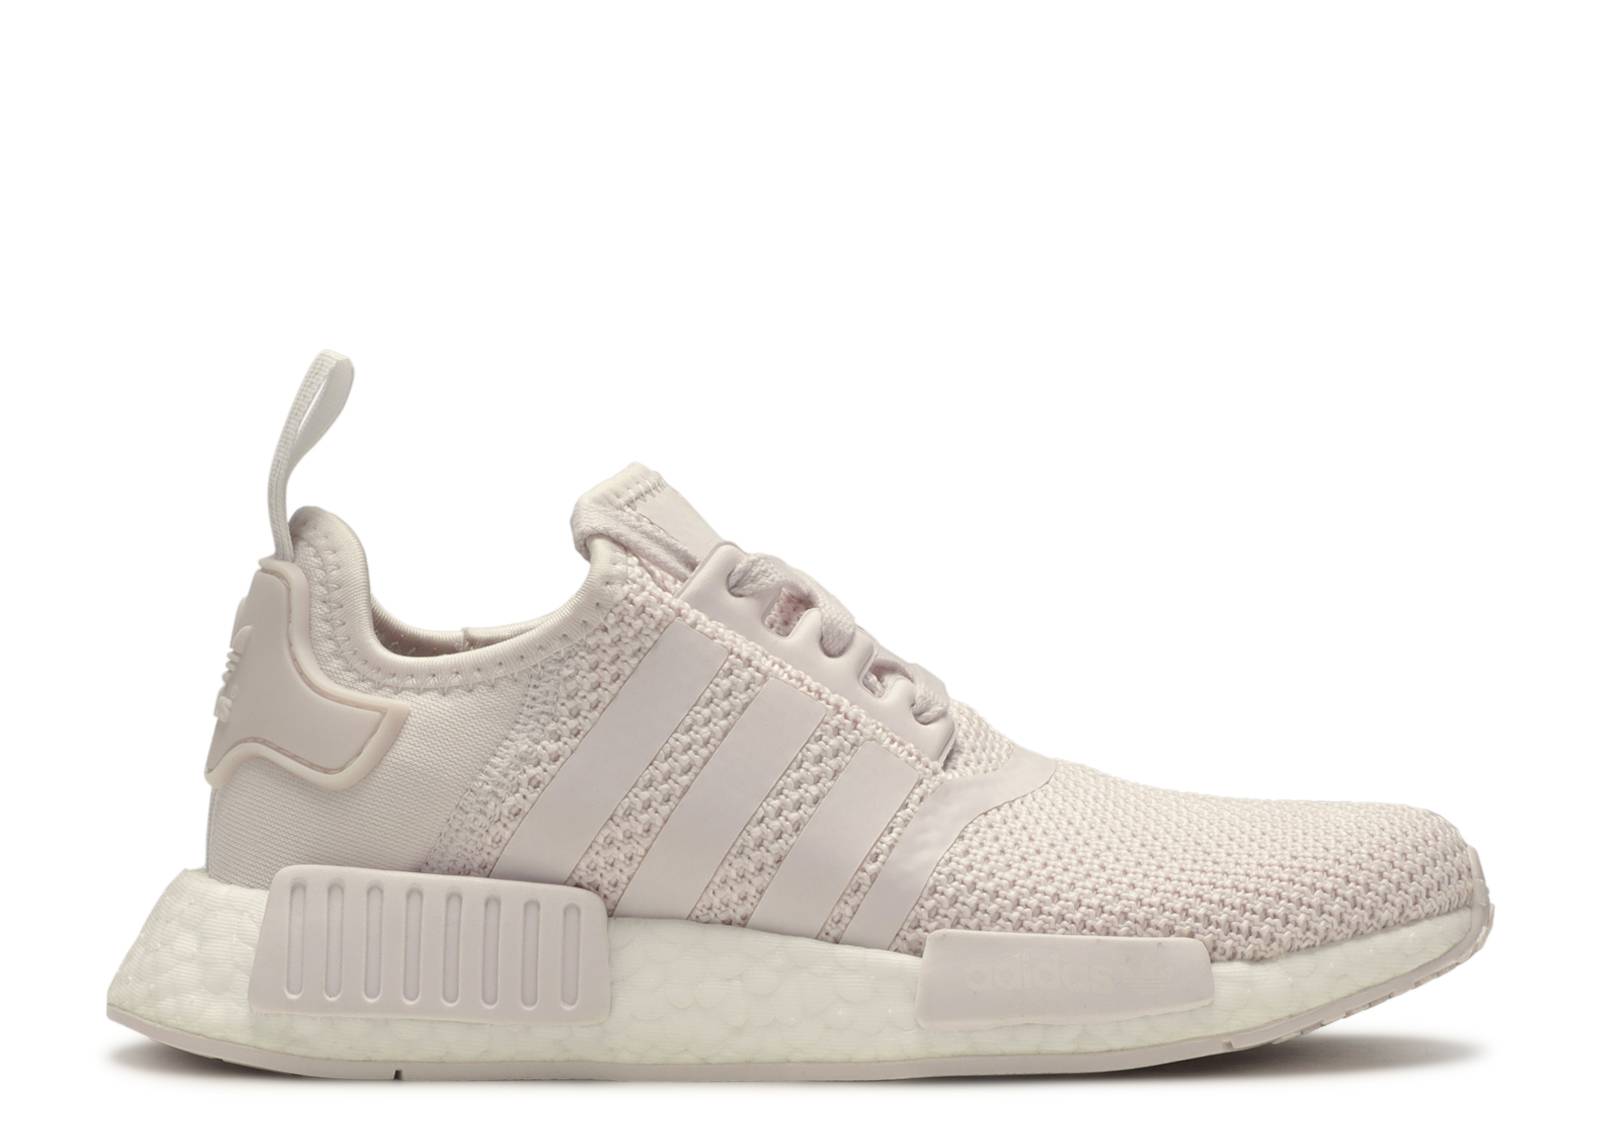 Wmns NMD_R1 'Orchid Tint'